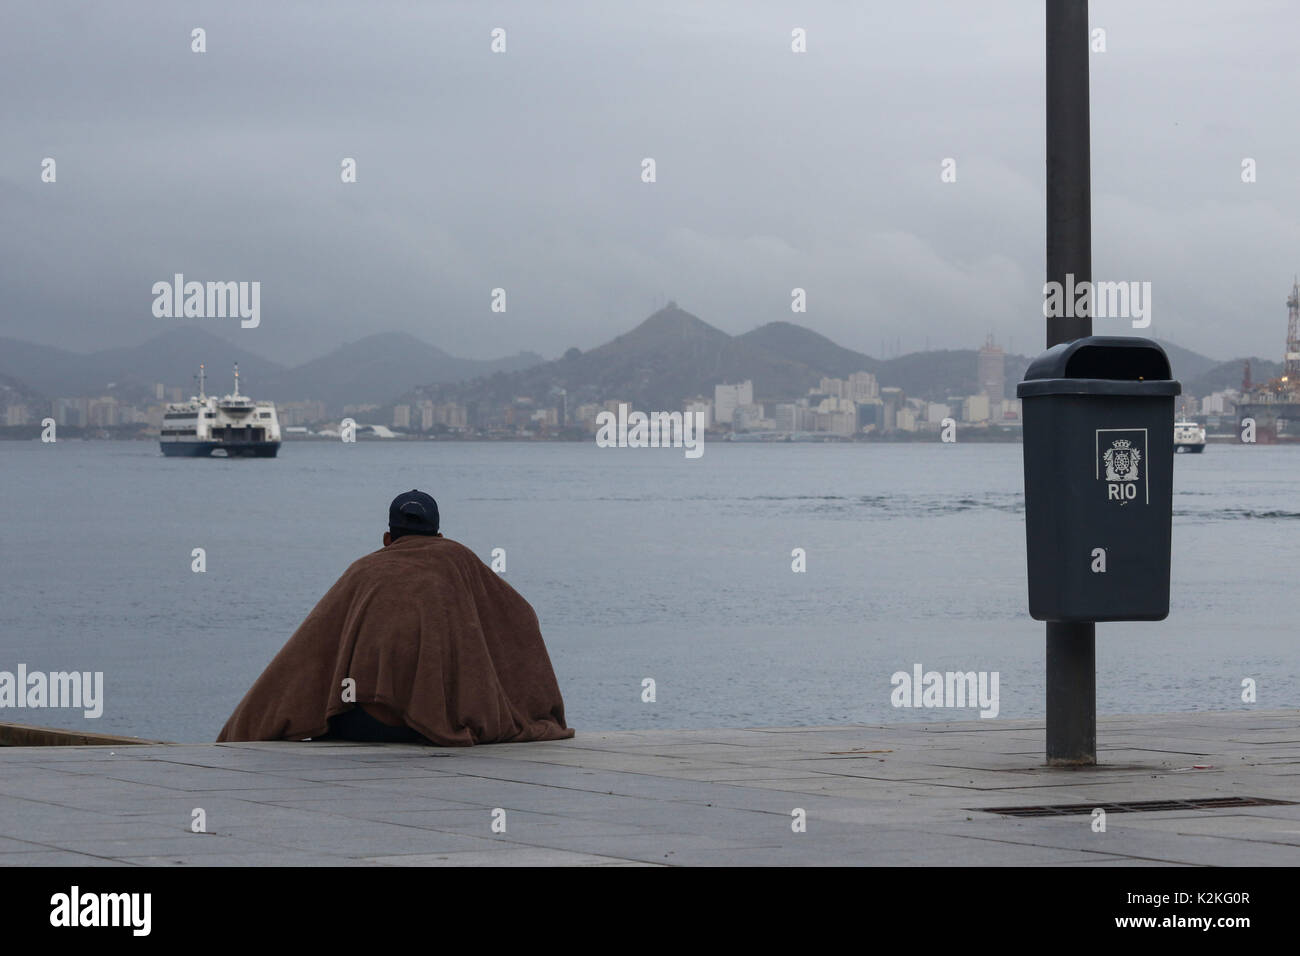 Rio de Janeiro, Brazil, August 31, 2017: End of August is marked by falling temperatures in the city of Rio de Janeiro. The thermometers marked below 20 degrees celsius. In this image street dweller protects himself from the cold with a blanket, while observing the movement of boats in Guanabara Bay on a cold and cloudy day. Credit: Luiz Souza/Alamy Live News Stock Photo